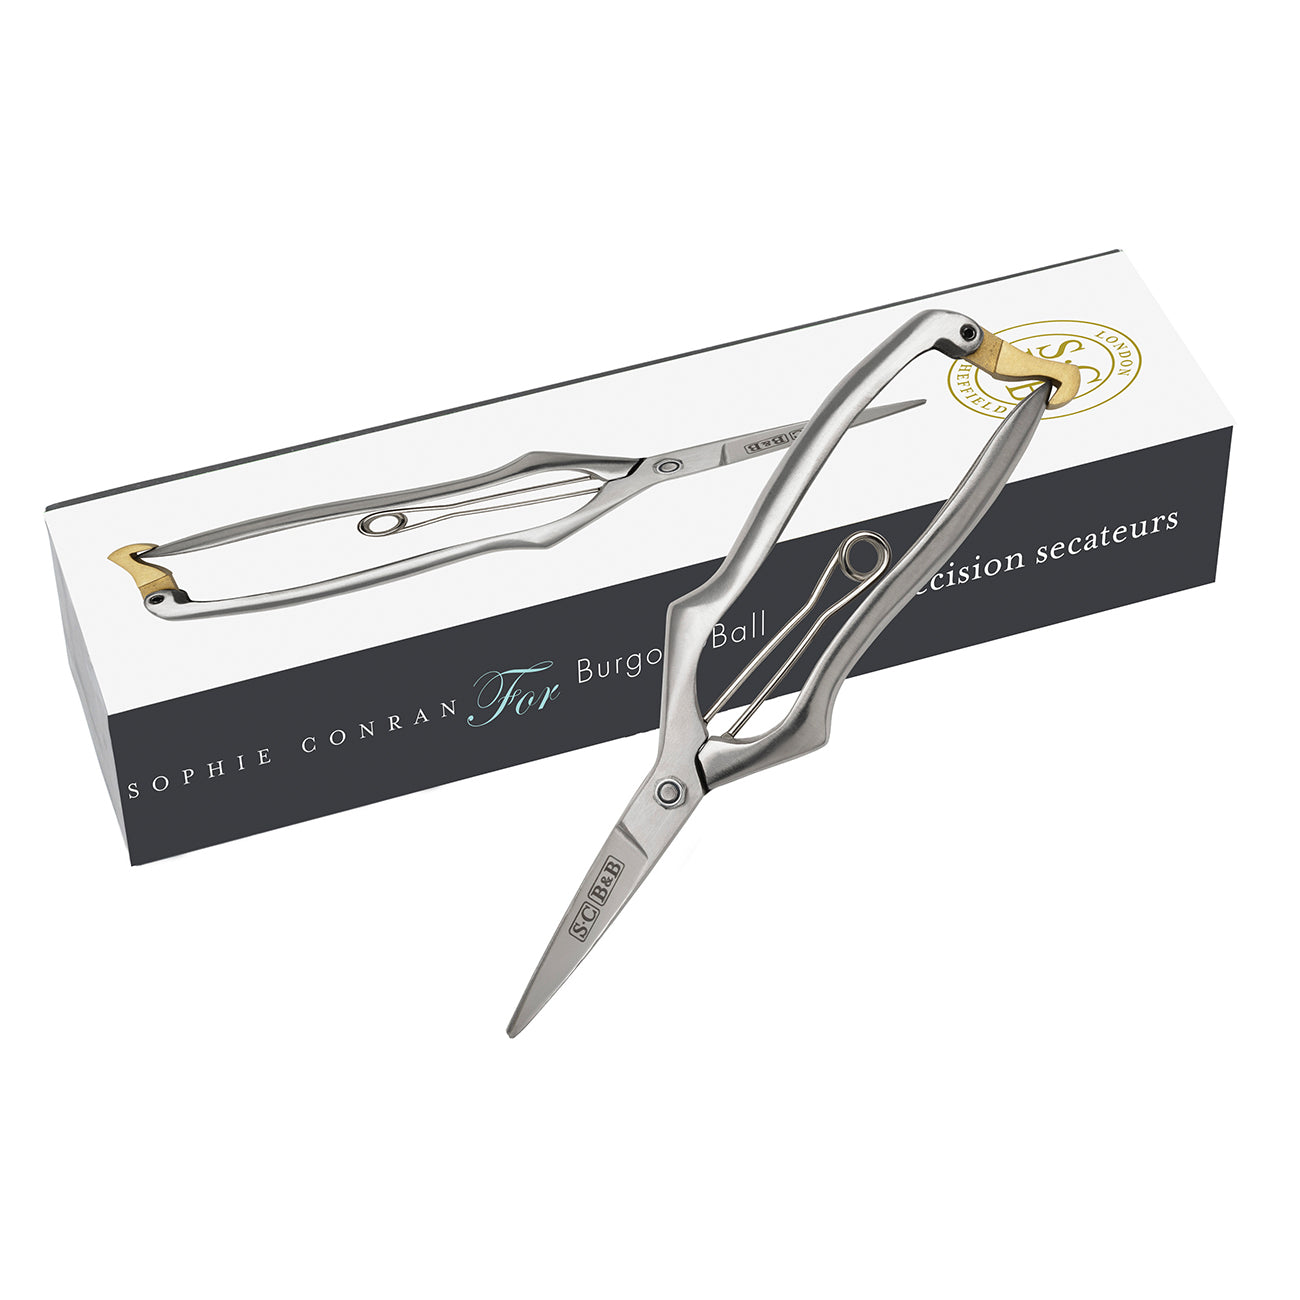 Sophie Conran for Burgon & Ball Precision Secateurs, Gift Boxed